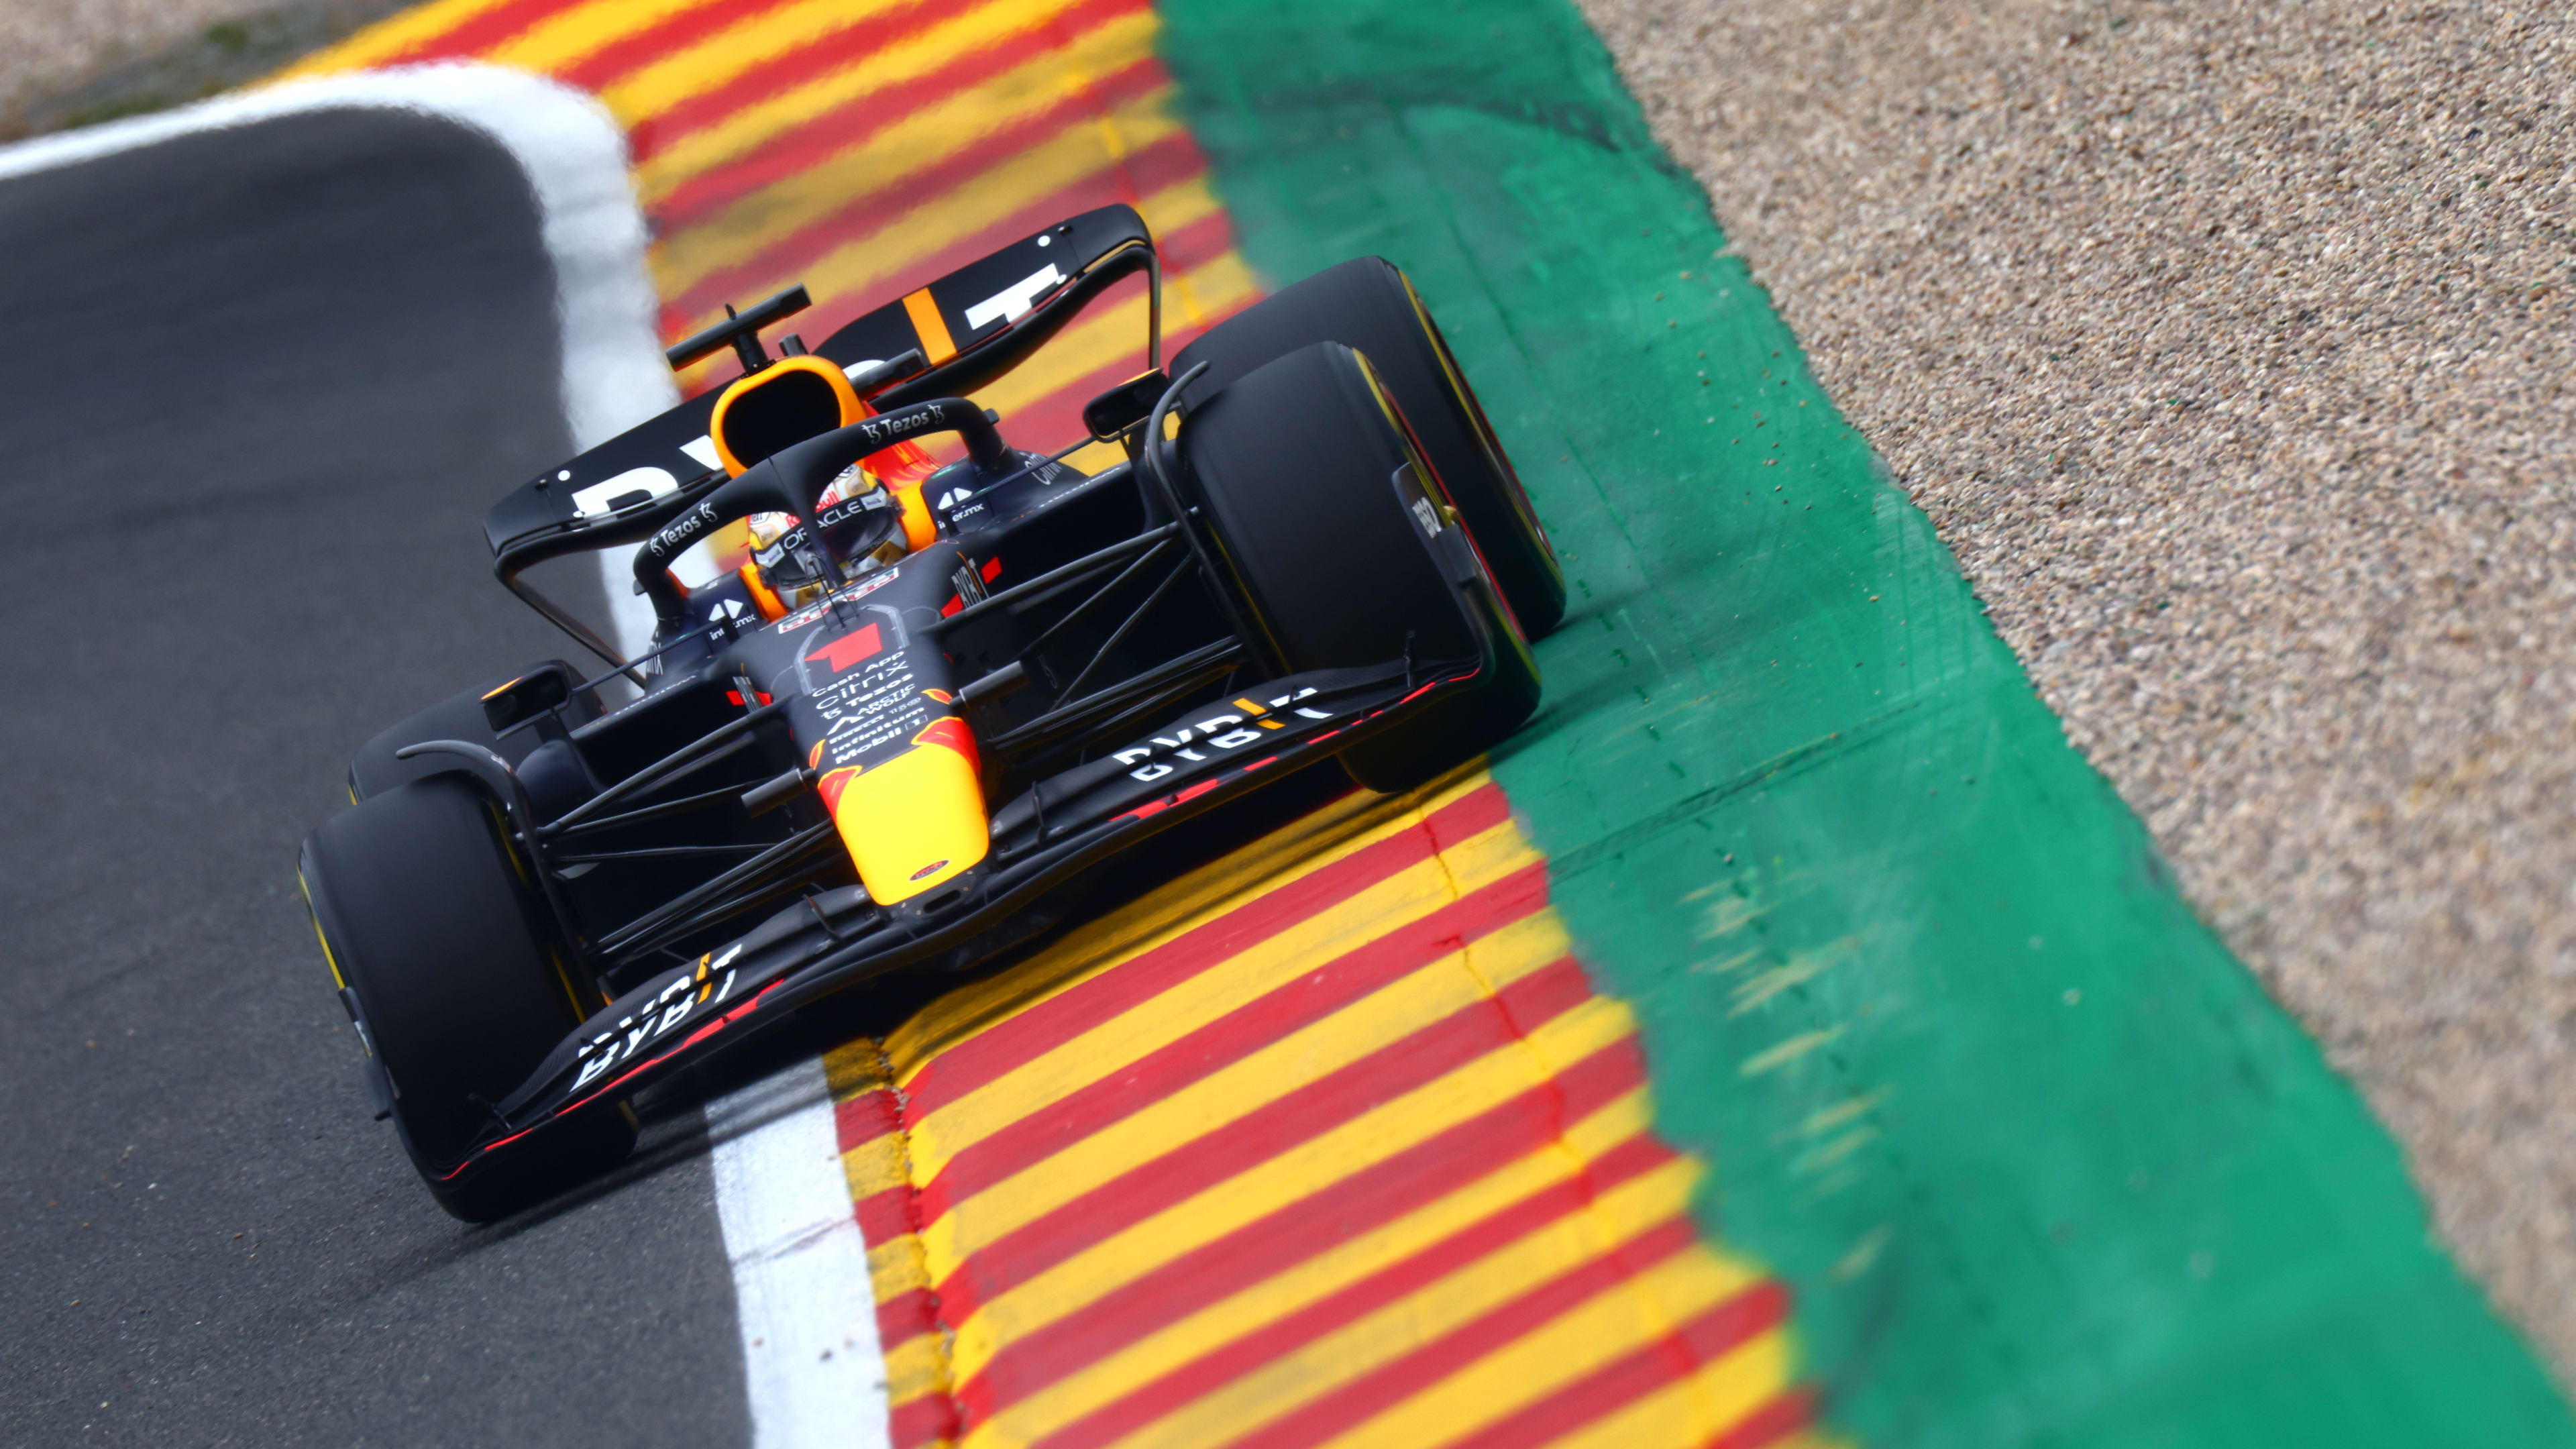 FP2 report and highlights from 2022 Belgian Grand Prix Dominant Verstappen comfortably clear of Leclerc in second Spa practice session Formula 1®